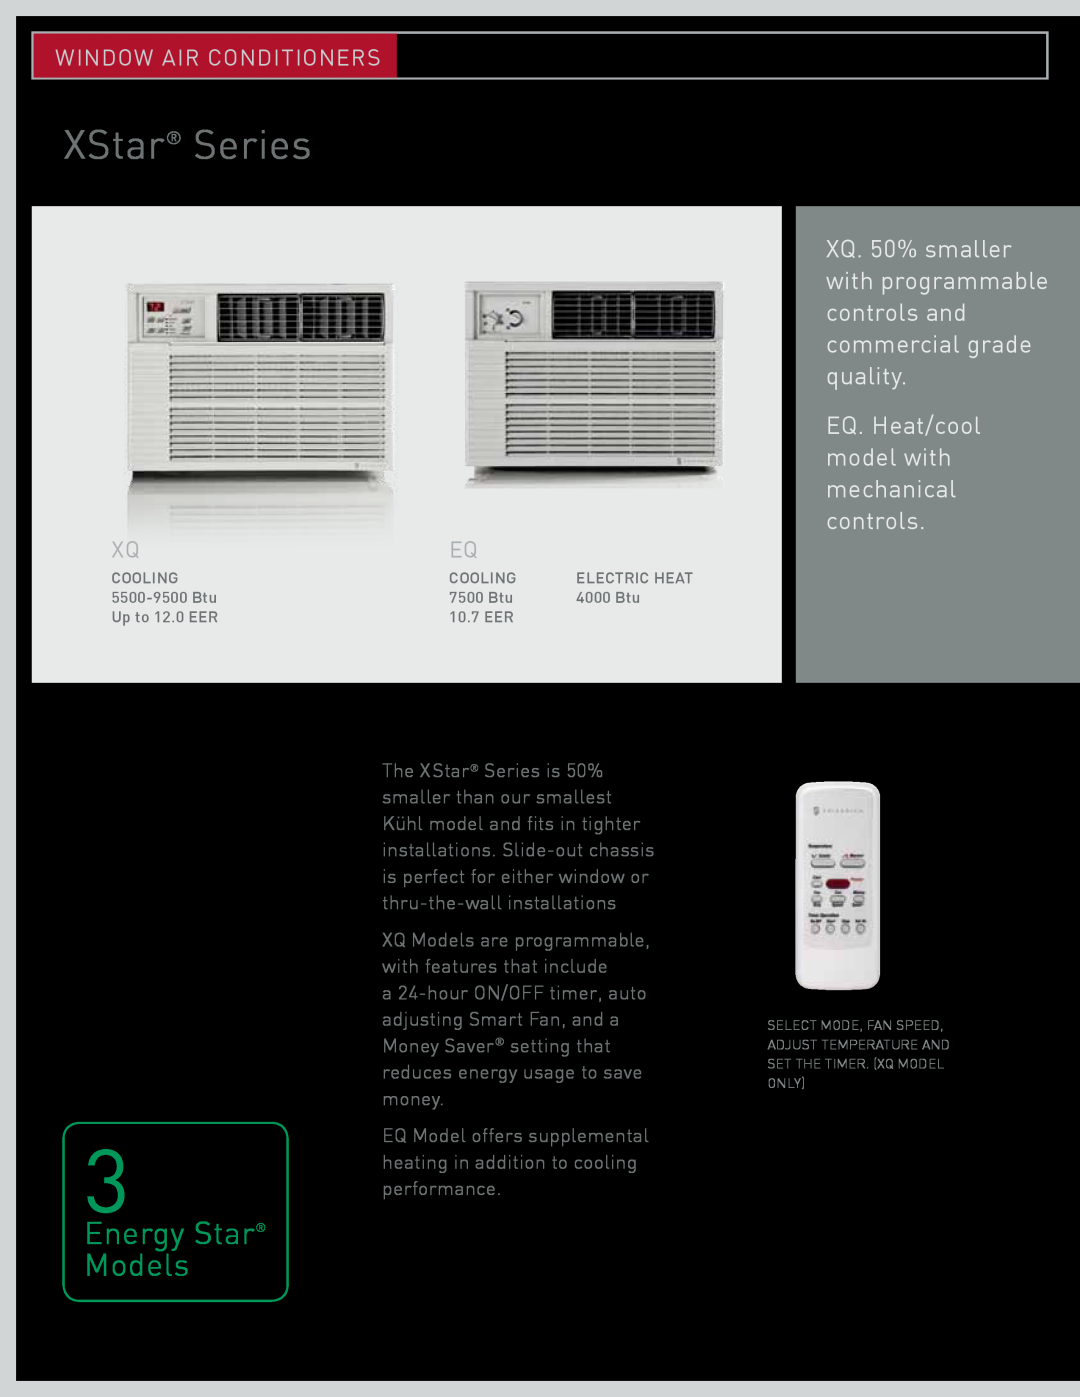 Friedrich CP24 XStar Series, EQ. Heat/cool model with mechanical controls, Energy Star Models, Window Air Conditioners 